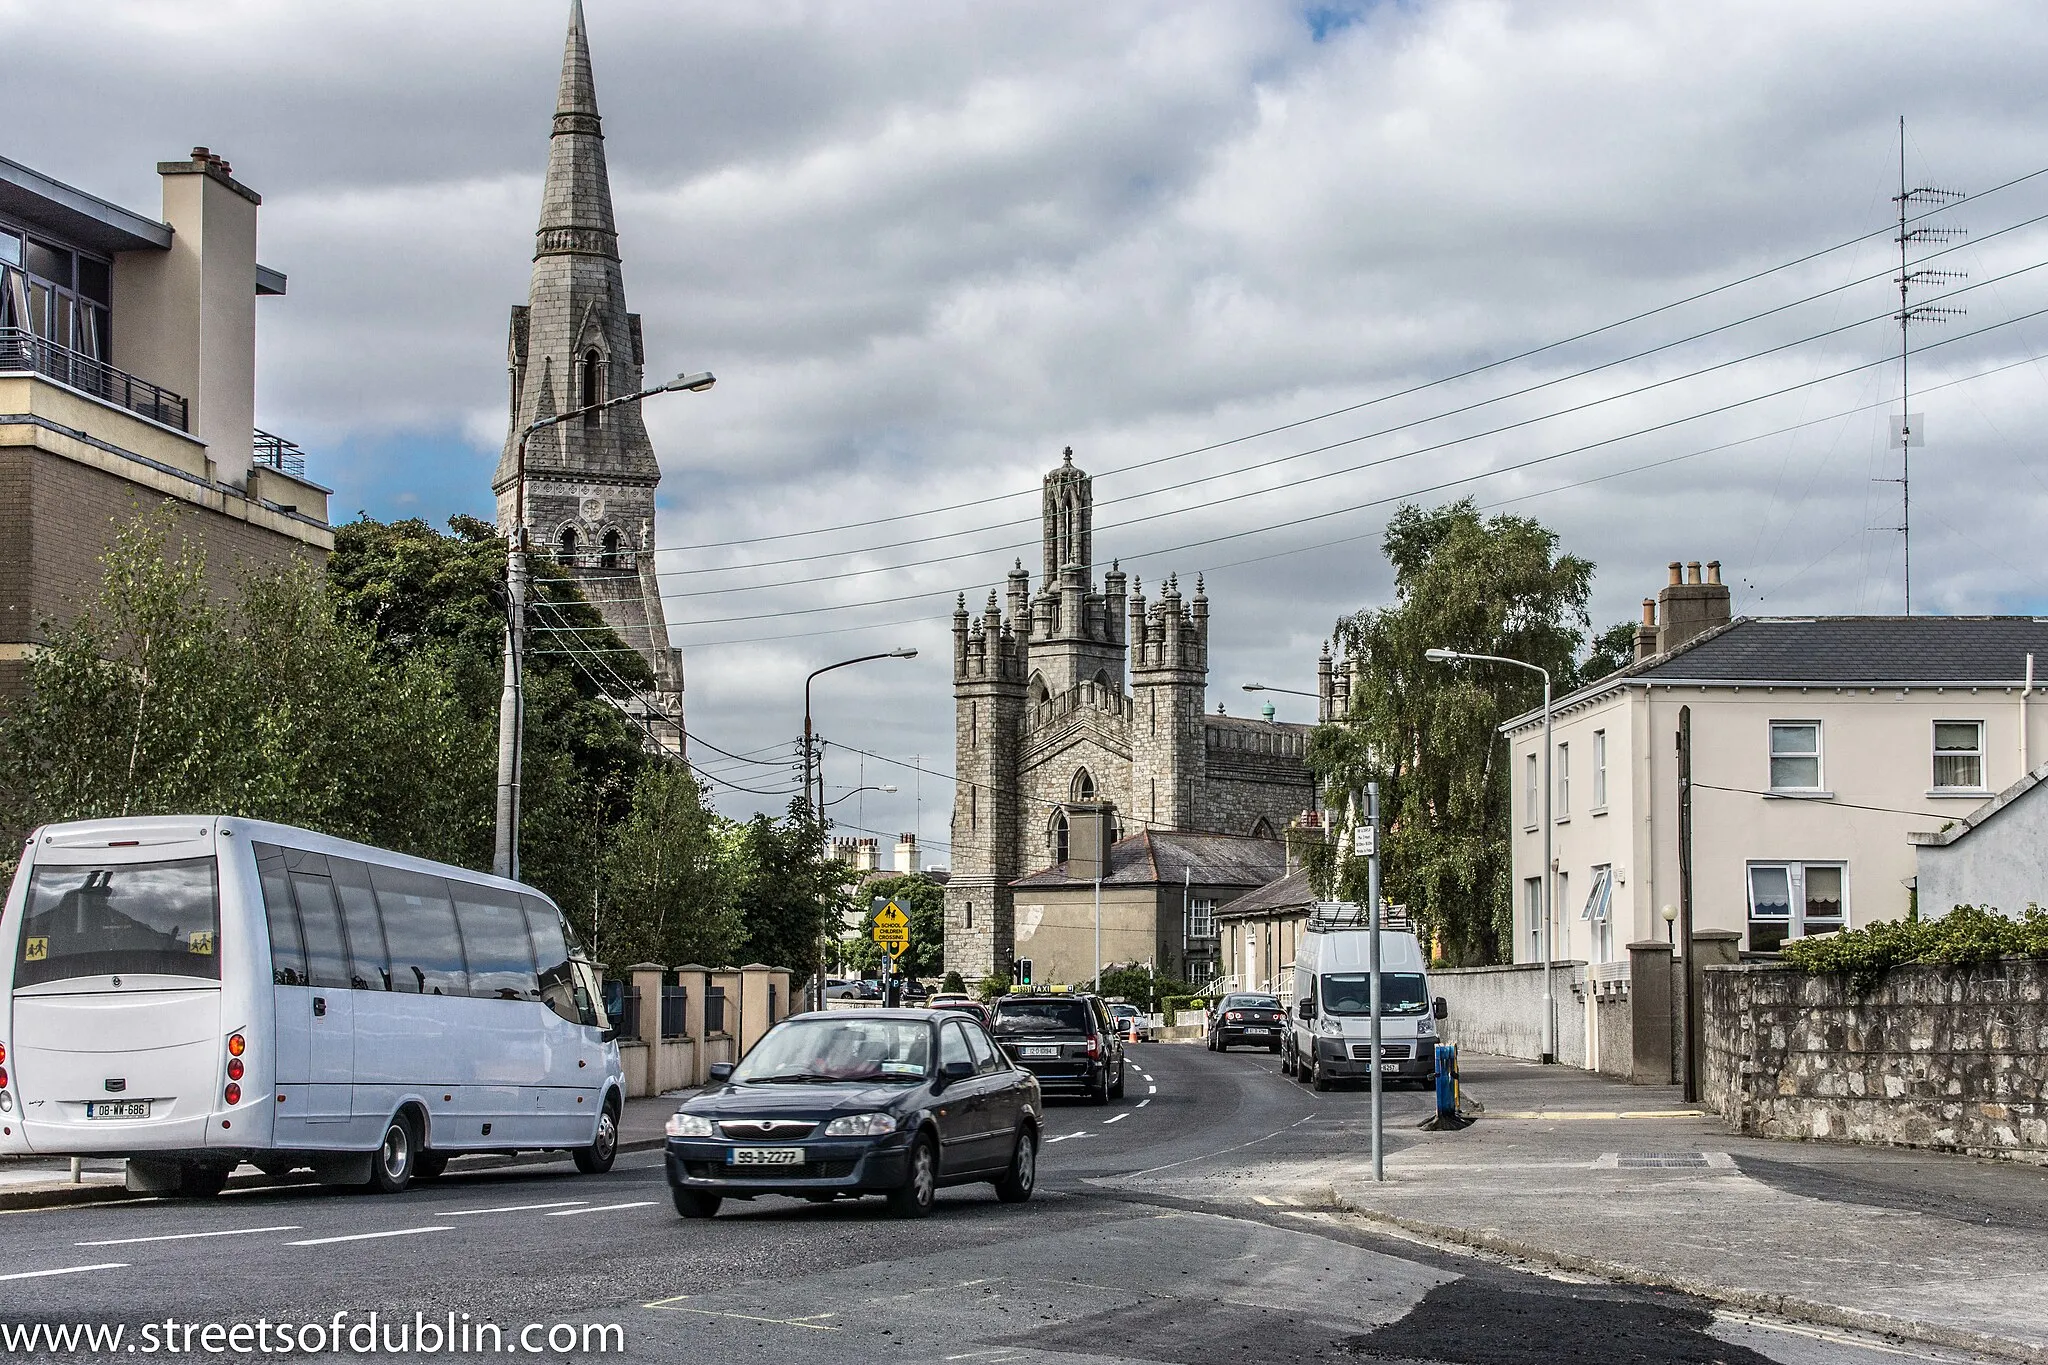 Photo showing: Monkstown, historically known as Carrickbrennan (Irish: Carraig Bhraonáin), is an area in south Dublin, located in Dun Laoghaire-Rathdown County, Ireland. It is on the coast, between Blackrock and Dún Laoghaire. The DART stations of Seapoint and Salthill and Monkstown serve the area.
In 1539, King Henry VIII awarded the Monkstown lands to Sir John Travers, Master of the Ordnance in Ireland. John Travers lived in his Castle at Monkstown from 1557 to his death in 1562 and is buried in the Carrickbrennan Graveyard where the property fell to James Eustace 3rd Viscount Baltinglass through his marriage to Mary Travers. In 1580, the Castle was used as a rebellion stronghold, after which it was awarded to Sir Henry Wallop, Vice-Treasurer of Ireland. The lands were later returned to Mary, the widow Baltinglass, who later married Gerald Alymer. On her death in 1610 the Castle was transferred to the Chevers family through the marriage of Mary Travers's sister Catherine to John Chevers, and the property passed directly to his second son Henry Chevers, who married Catherine, daughter of Sir Richard Fitzwilliam. Henry and Catherine Chevers lived here with their four children (Walter, Thomas, Patrick, Margaret).
Upon the death of Henry in 1640, the castle and lands were passed to Walter Cheevers. Walter and family were given command to vacate Monkstown in 1653 by the Cromwellian Commissioners, and transplanted to Killyan, County Galway. In 1660, Walter Chevers was restored to his estate at Monkstown Castle, until his death in 1678.
Monkstown was later purchased by Bishop of Armagh Michael Boyle where his son Murragh, Viscount Blessington enlarged the castle making it one of the finest residences.
Until about 1800, Monkstown was a rural area of open countryside, dotted here and there with large houses owned by the merchants of Dublin. The Monkstown Church (Church of Ireland) had been built - but was smaller than the present church. Two rivers met in the area now called Pakenham Road. The river known as Micky Briens originated in Sallynoggin. A lake beside Monkstown Castle had one small island. The coastline was ragged and rocky, with a harbour stretching over 100 yards inland at the mouth of the aforementioned rivers, adjacent to the area now occupied by the West Pier. Dun Laoghaire (then called Dunleary, and later Kingstown) was then a small group of houses in the area of the Purty Kitchen, and the present area of Dún Laoghaire was an area of rocky outcrops and later, quarries.
Wednesday, November 18, 1807 was South Dublin's night of disasters. In an horrific storm, two sailing ships, the Rochdale and the Prince of Wales were blown on to the rocks, one at Seapoint and the other at Blackrock. About 400 lives in total were lost on that night, many of them washed up on the shore at Monkstown. The disaster was one of the factors which led to the building of Dun Laoghaire Harbour. Most of the victims were buried in Carrickbrennan Churchyard.
The building of Dun Laoghaire harbour gave an impetus to the area, and Montpelier Terrace was the first of many terraces built in the area. The coming of the railway in 1837 had a much greater impact. Firstly, it changed the topology of the coast, and secondly, it led to Monkstown becoming a commuter suburb of the city of Dublin. Most of the houses along Monkstown Road and the avenues north of that road were constructed over the next 30 years. The maps of 1870 show this phase completed, but the rest of Monkstown consists of mansions surrounded by extensive gardens. For the following 50 years there was little change. The post-war developments of Castle Park, Richmond, Windsor, etc. and the more recent developments of Brook Court, Monkstown Valley, and Carrickbrennan Lawn mean that there is little opportunity for further development.

The diaries of the Rev John Thomas Hynes(1799-1868), a Catholic bishop who retired to Monkstown in 1861-1868 provide a valuable insight into daily life in Monkstown in that period. Hynes lived at Bloomwood, Monkstown Avenue (later renamed as Carrickbrennan Road), and later moved to Uplands, The Hill, Monkstown. The Hynes Diaries recount such details as the coming of gas lighting, the postal and travel facilities, church affairs, and lots of local gossip. The Hynes diaries are now preserved in Melbourne, but the full text has been made available online at www.unisanet.unisa.edu.au/research/condon/Hynes/index.htm